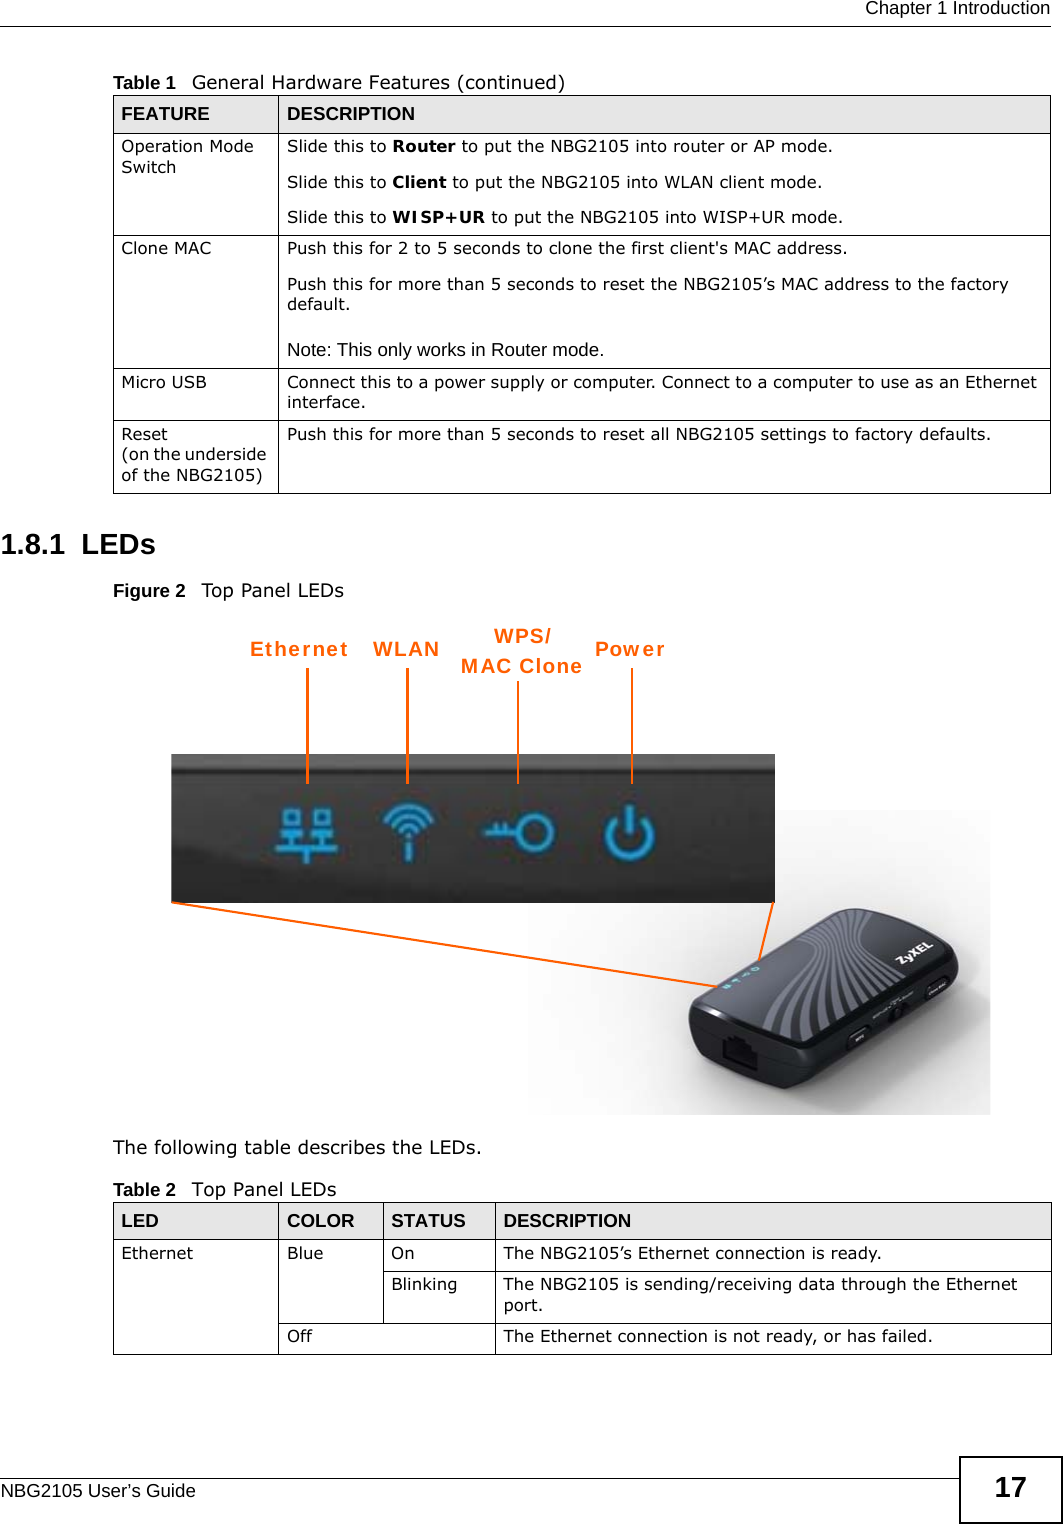  Chapter 1 IntroductionNBG2105 User’s Guide 171.8.1  LEDsFigure 2   Top Panel LEDsThe following table describes the LEDs.Operation Mode SwitchSlide this to Router to put the NBG2105 into router or AP mode.Slide this to Client to put the NBG2105 into WLAN client mode.Slide this to WISP+UR to put the NBG2105 into WISP+UR mode.Clone MAC Push this for 2 to 5 seconds to clone the first client&apos;s MAC address.Push this for more than 5 seconds to reset the NBG2105’s MAC address to the factory default.Note: This only works in Router mode.Micro USB Connect this to a power supply or computer. Connect to a computer to use as an Ethernet interface.Reset (on the underside of the NBG2105)Push this for more than 5 seconds to reset all NBG2105 settings to factory defaults.Table 1   General Hardware Features (continued)FEATURE DESCRIPTIONTable 2   Top Panel LEDsLED COLOR STATUS DESCRIPTIONEthernet Blue On The NBG2105’s Ethernet connection is ready. Blinking The NBG2105 is sending/receiving data through the Ethernet port.Off The Ethernet connection is not ready, or has failed.PowerWLAN WPS/Ethernet MAC Clone